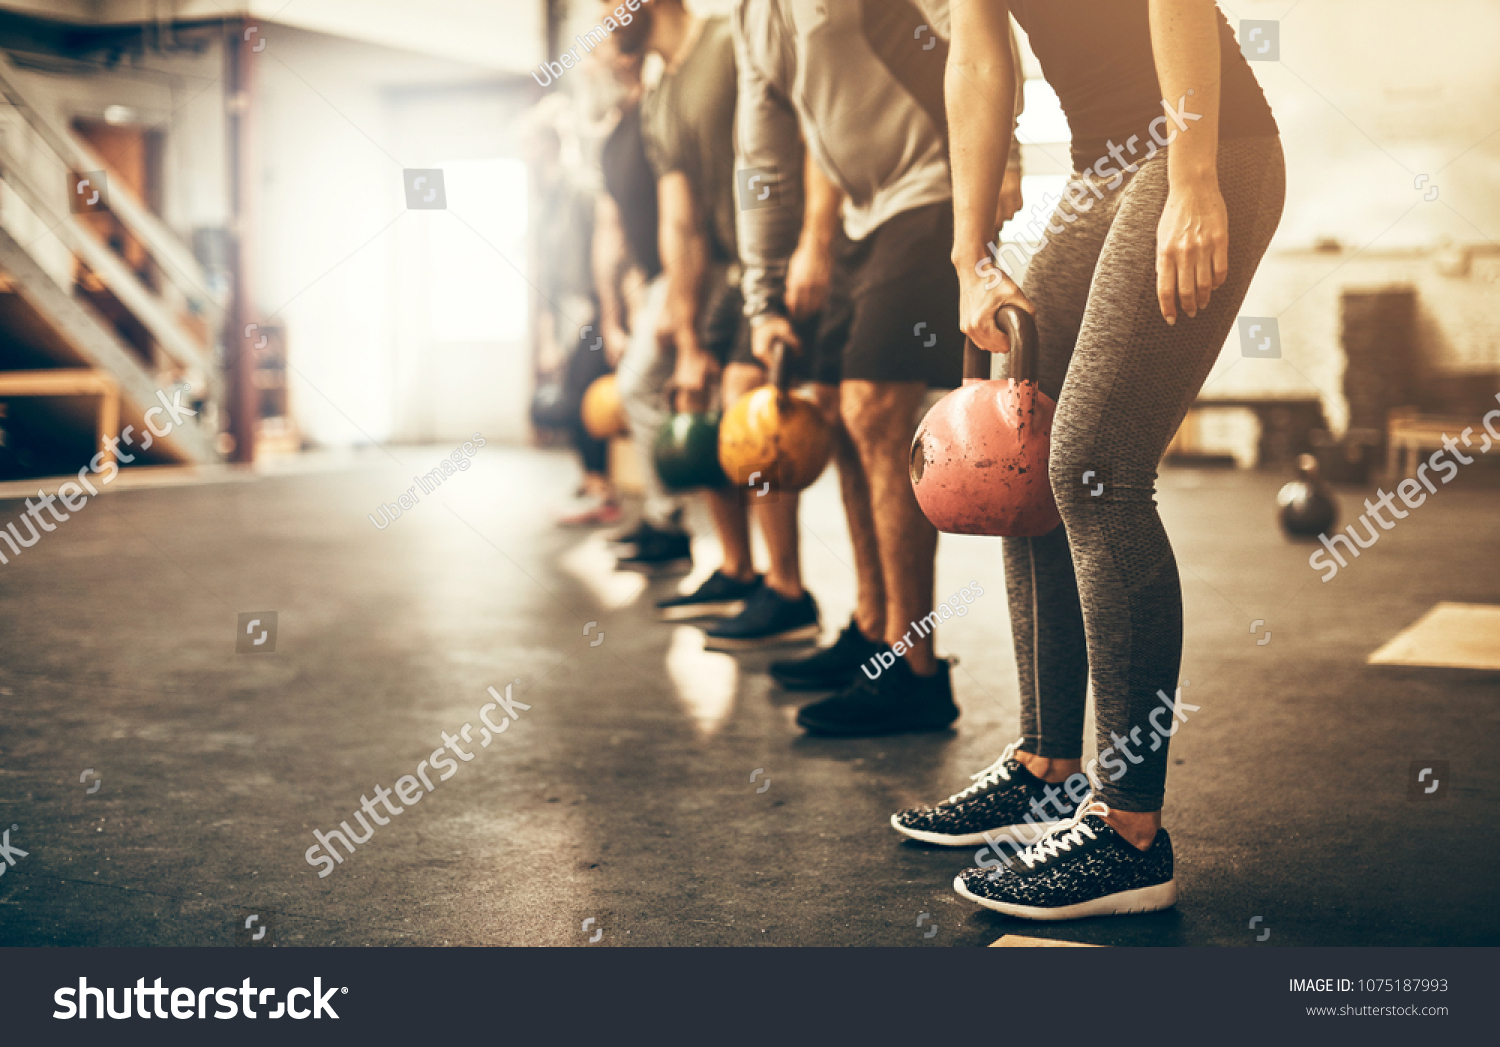 Fit group people in exercise gear standing in a row holding dumbbells during an exercise class at the gym #1075187993